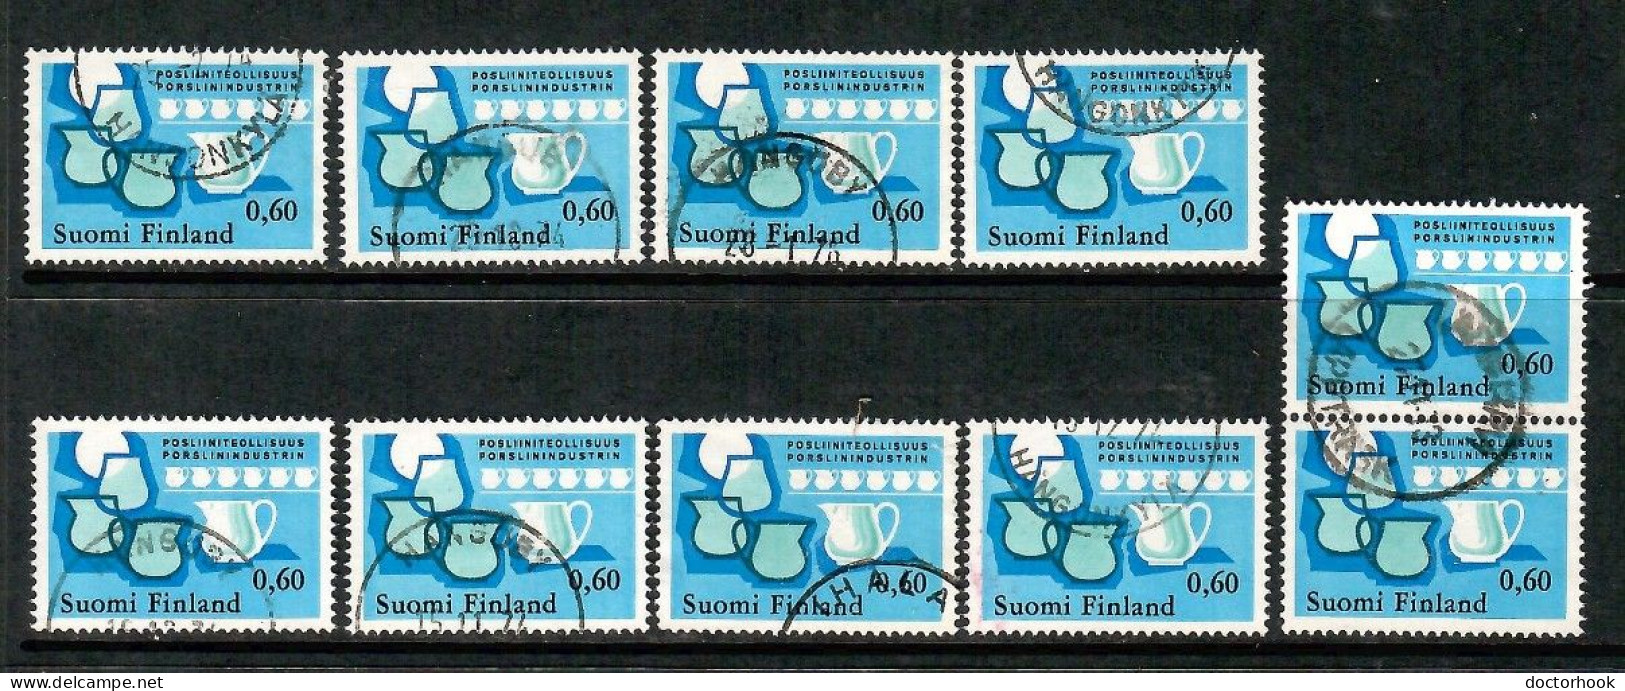 FINLAND   Scott # 541 USED WHOLESALE LOT OF 10 (CONDITION AS PER SCAN) (WH-631) - Collections